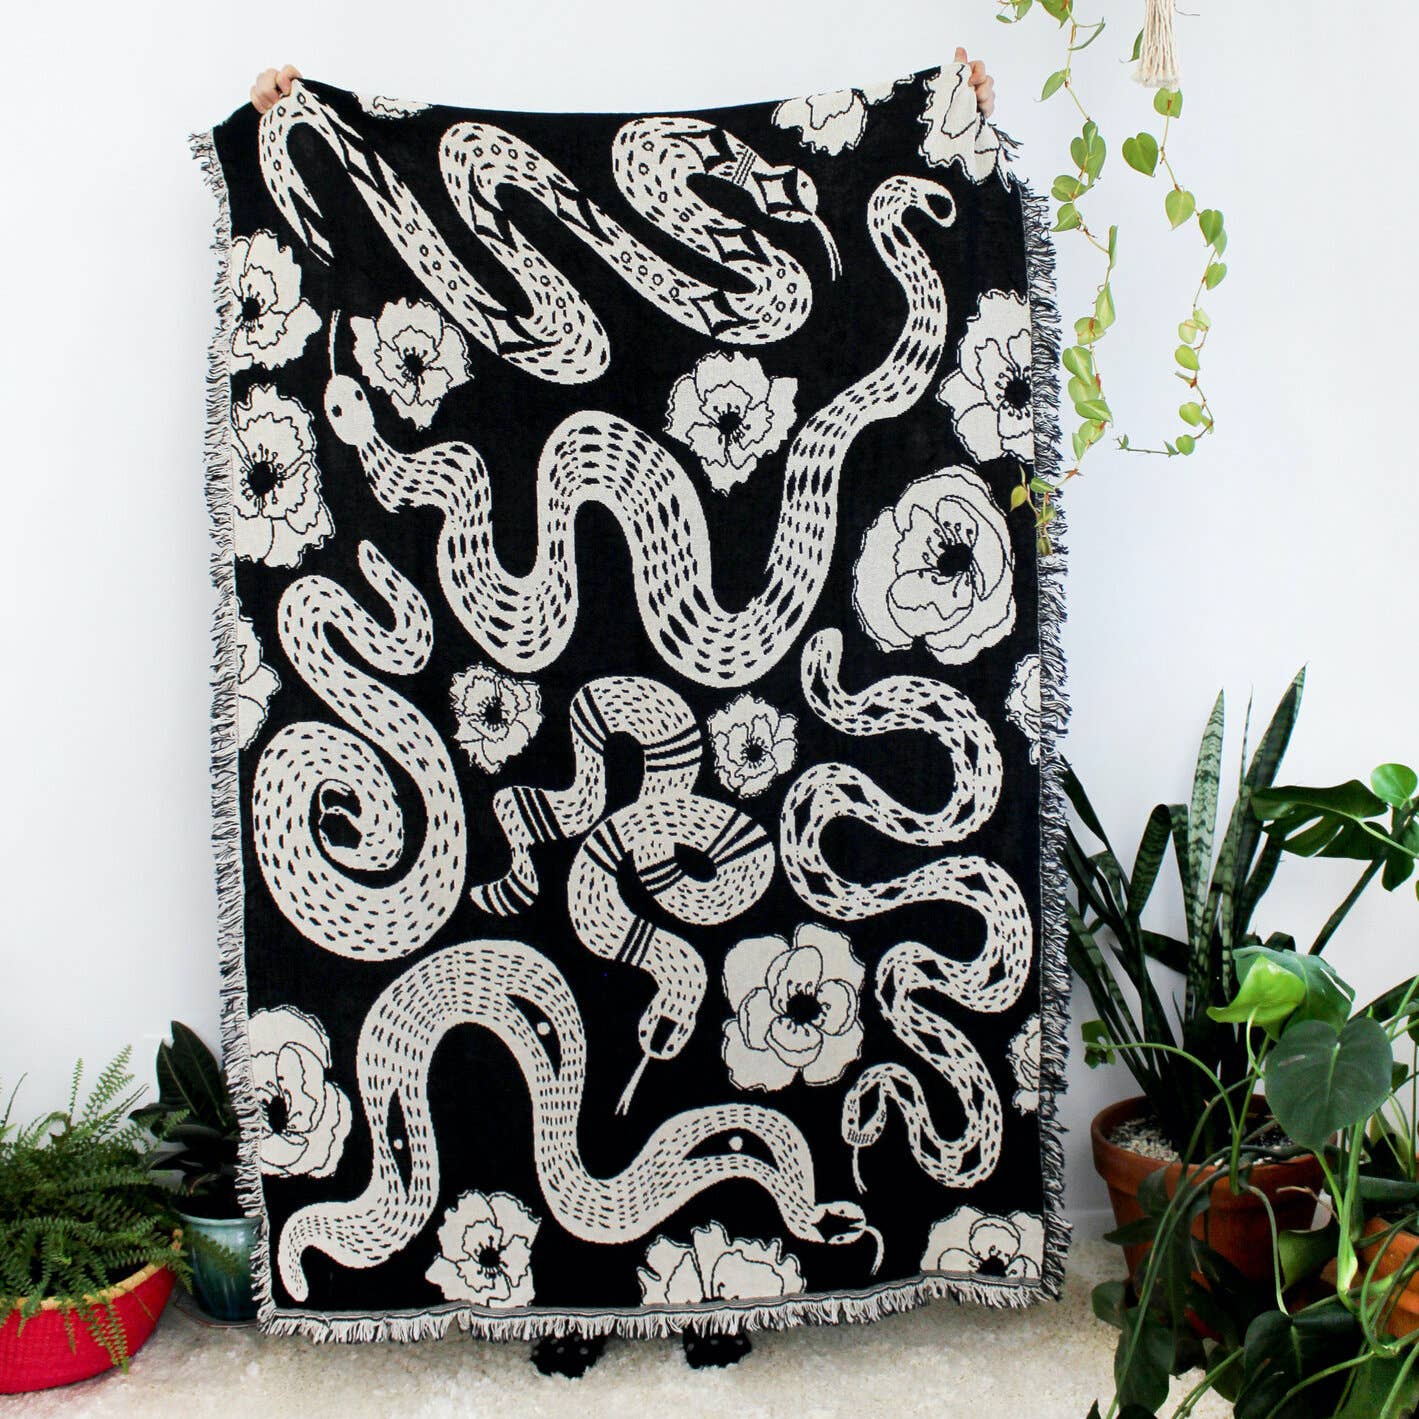 Snakes and Poppies Black and White Throw Blanket